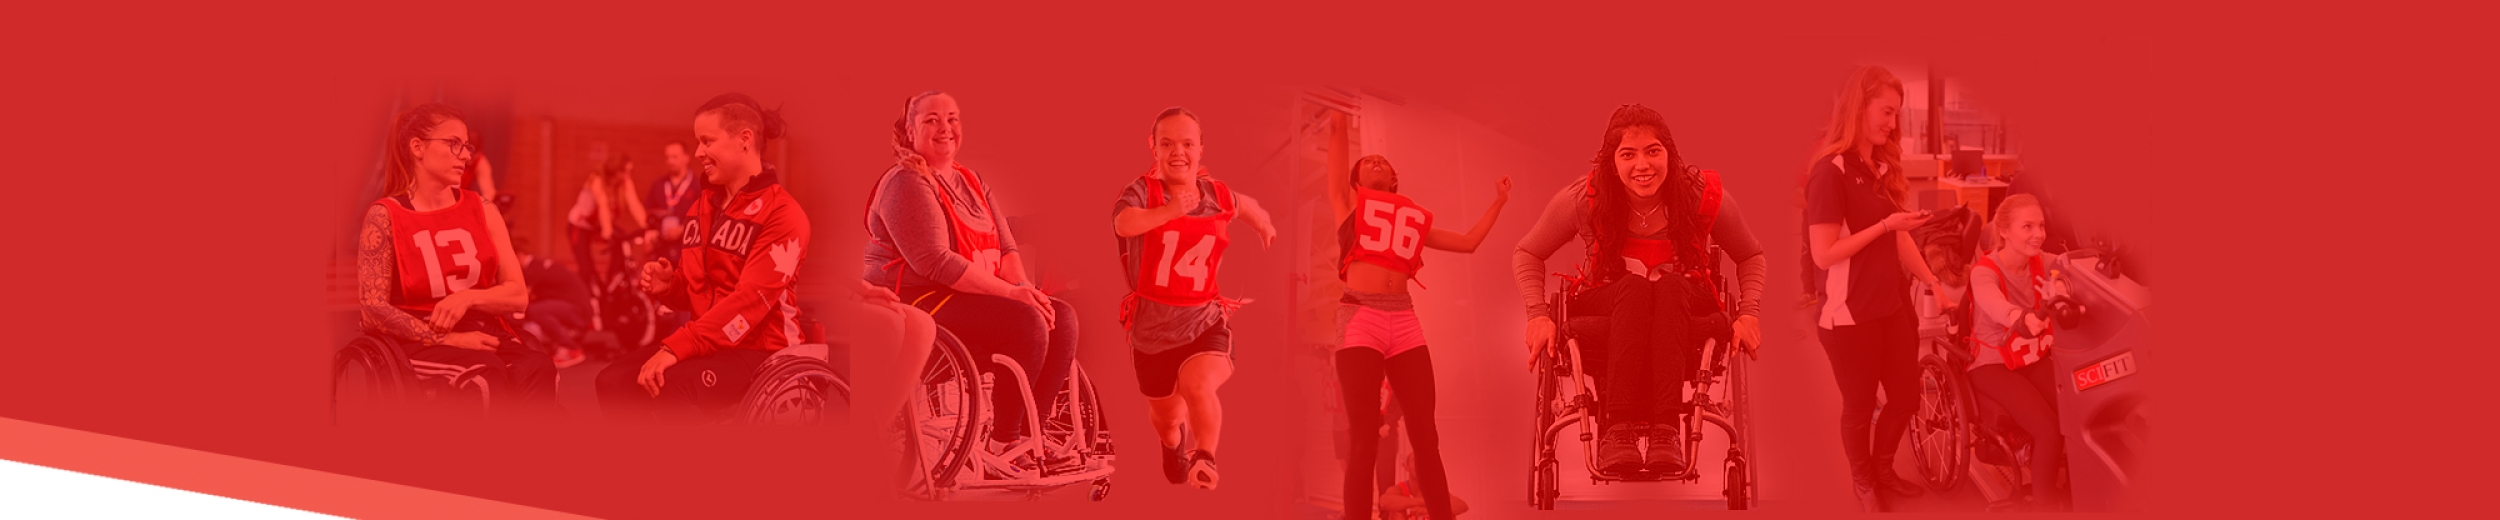 Red overlay on athlete ambassador images, representing multiple women over different sport and disabilities